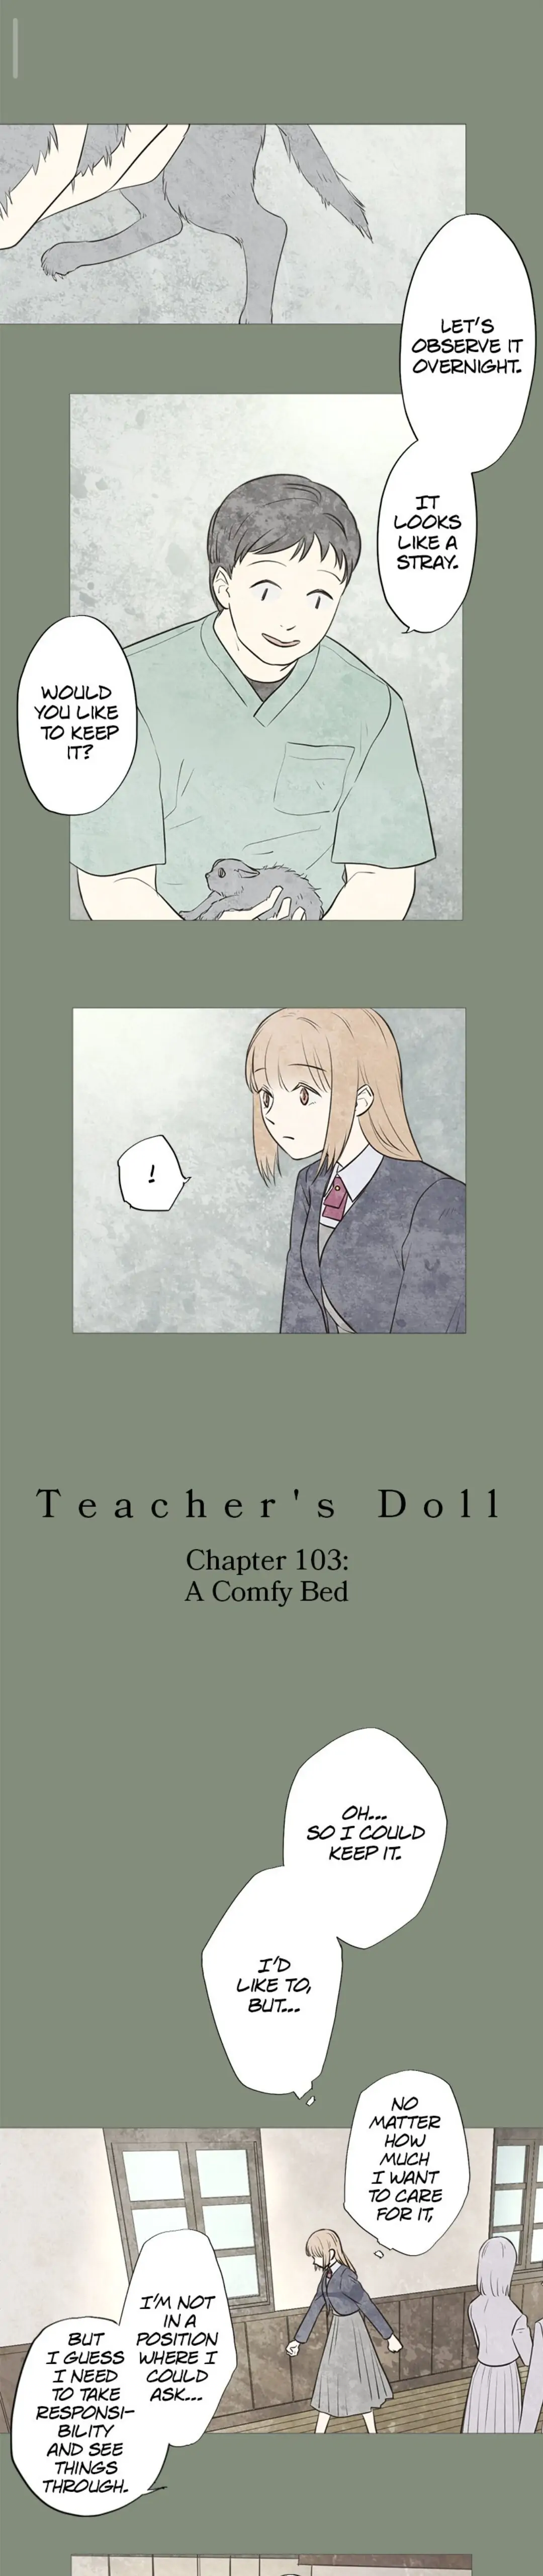 Doll of the Teacher Chapter 103 - page 1